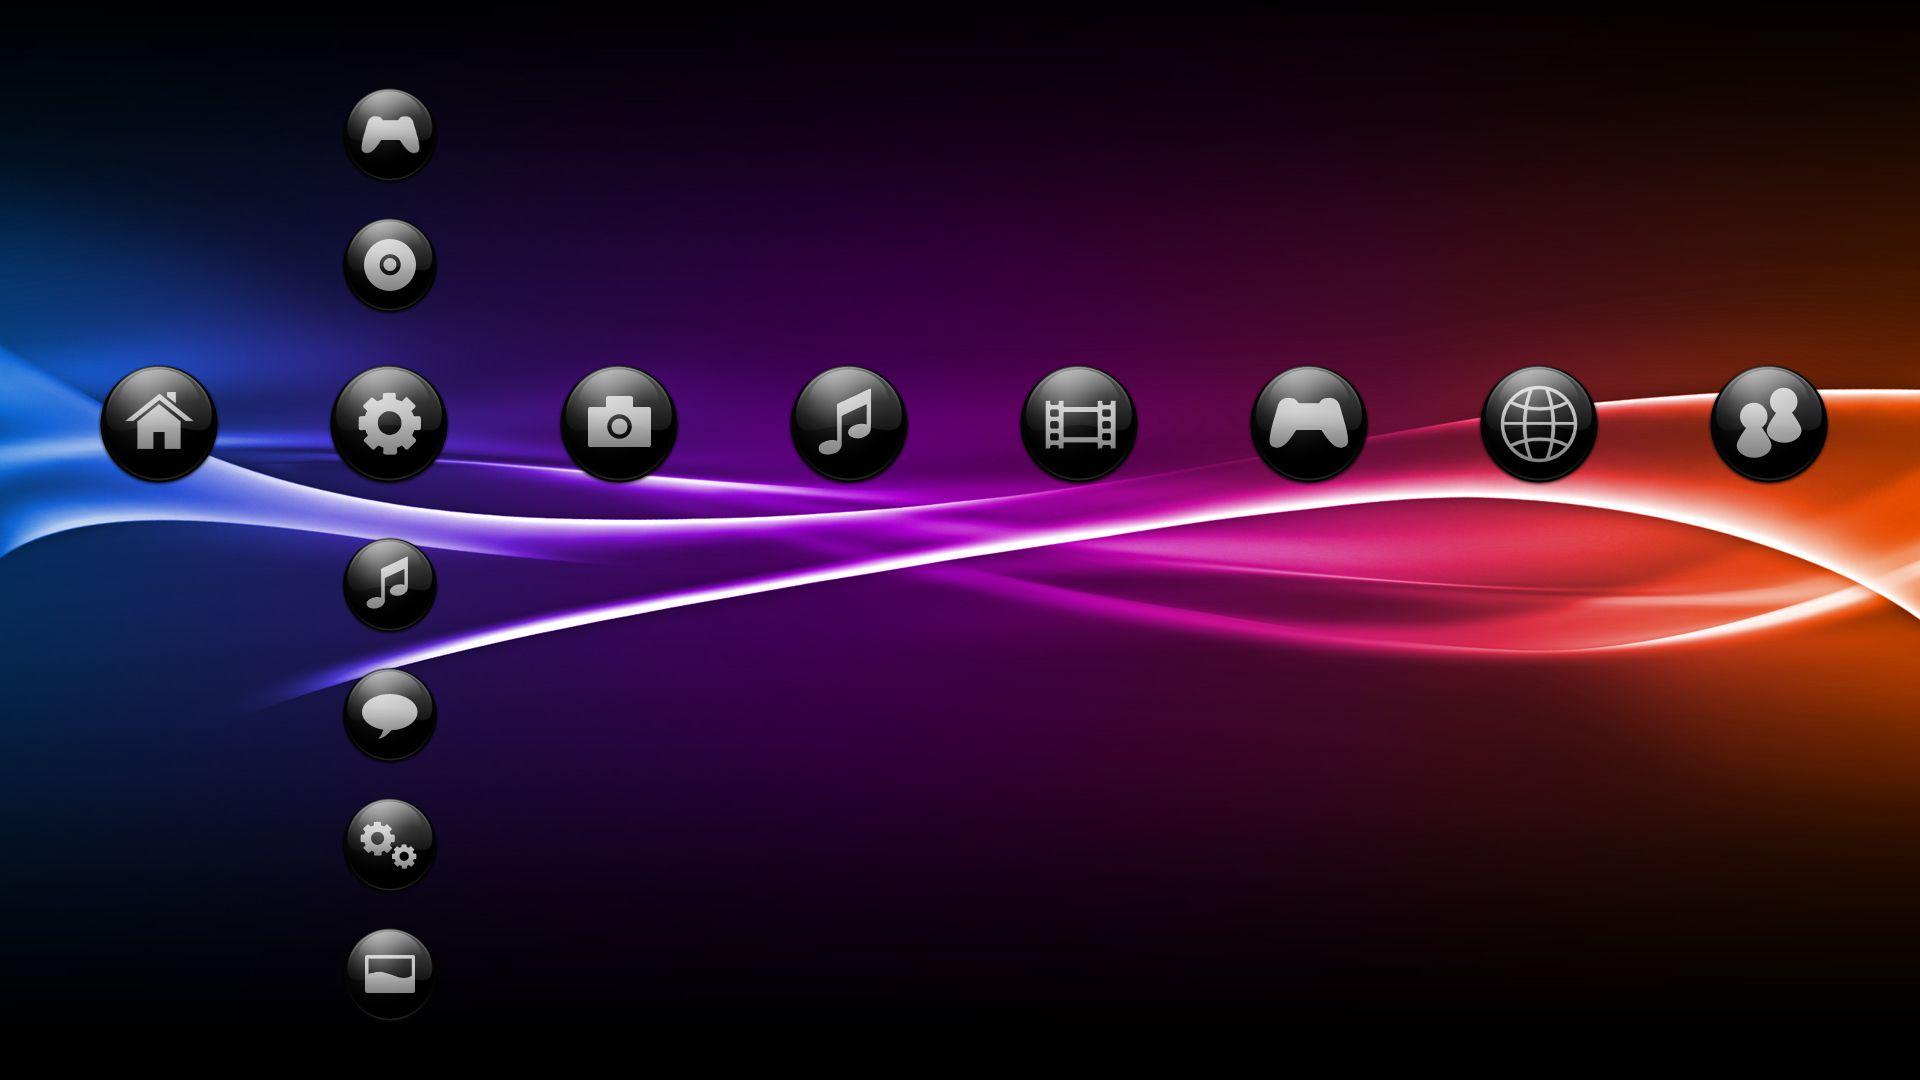 Ps3 wallpaper and themes